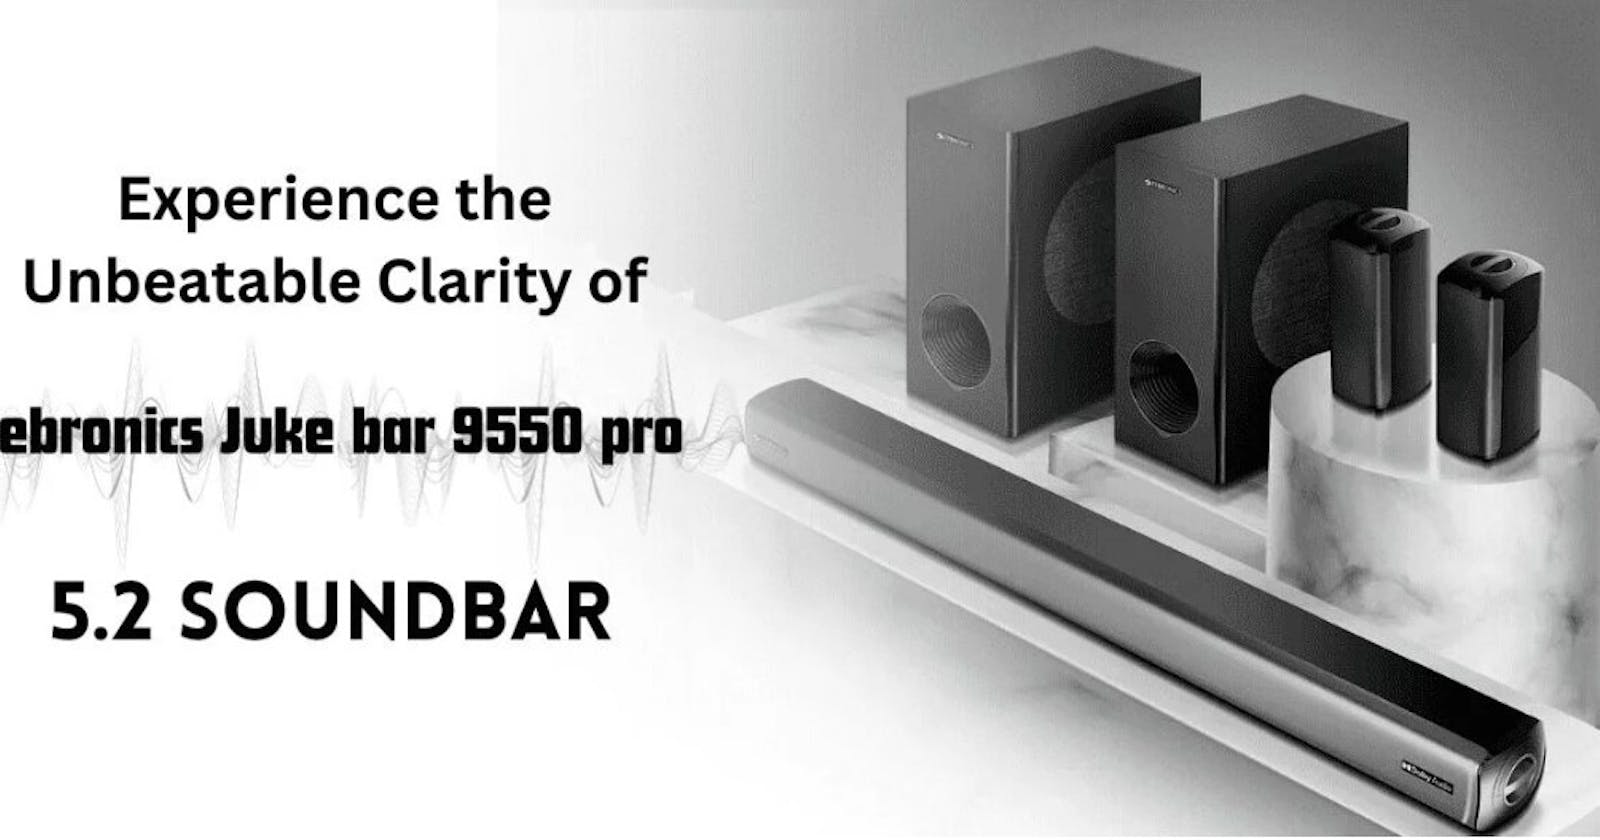 Experience the Best Sound Clarity with Zebronics 9550